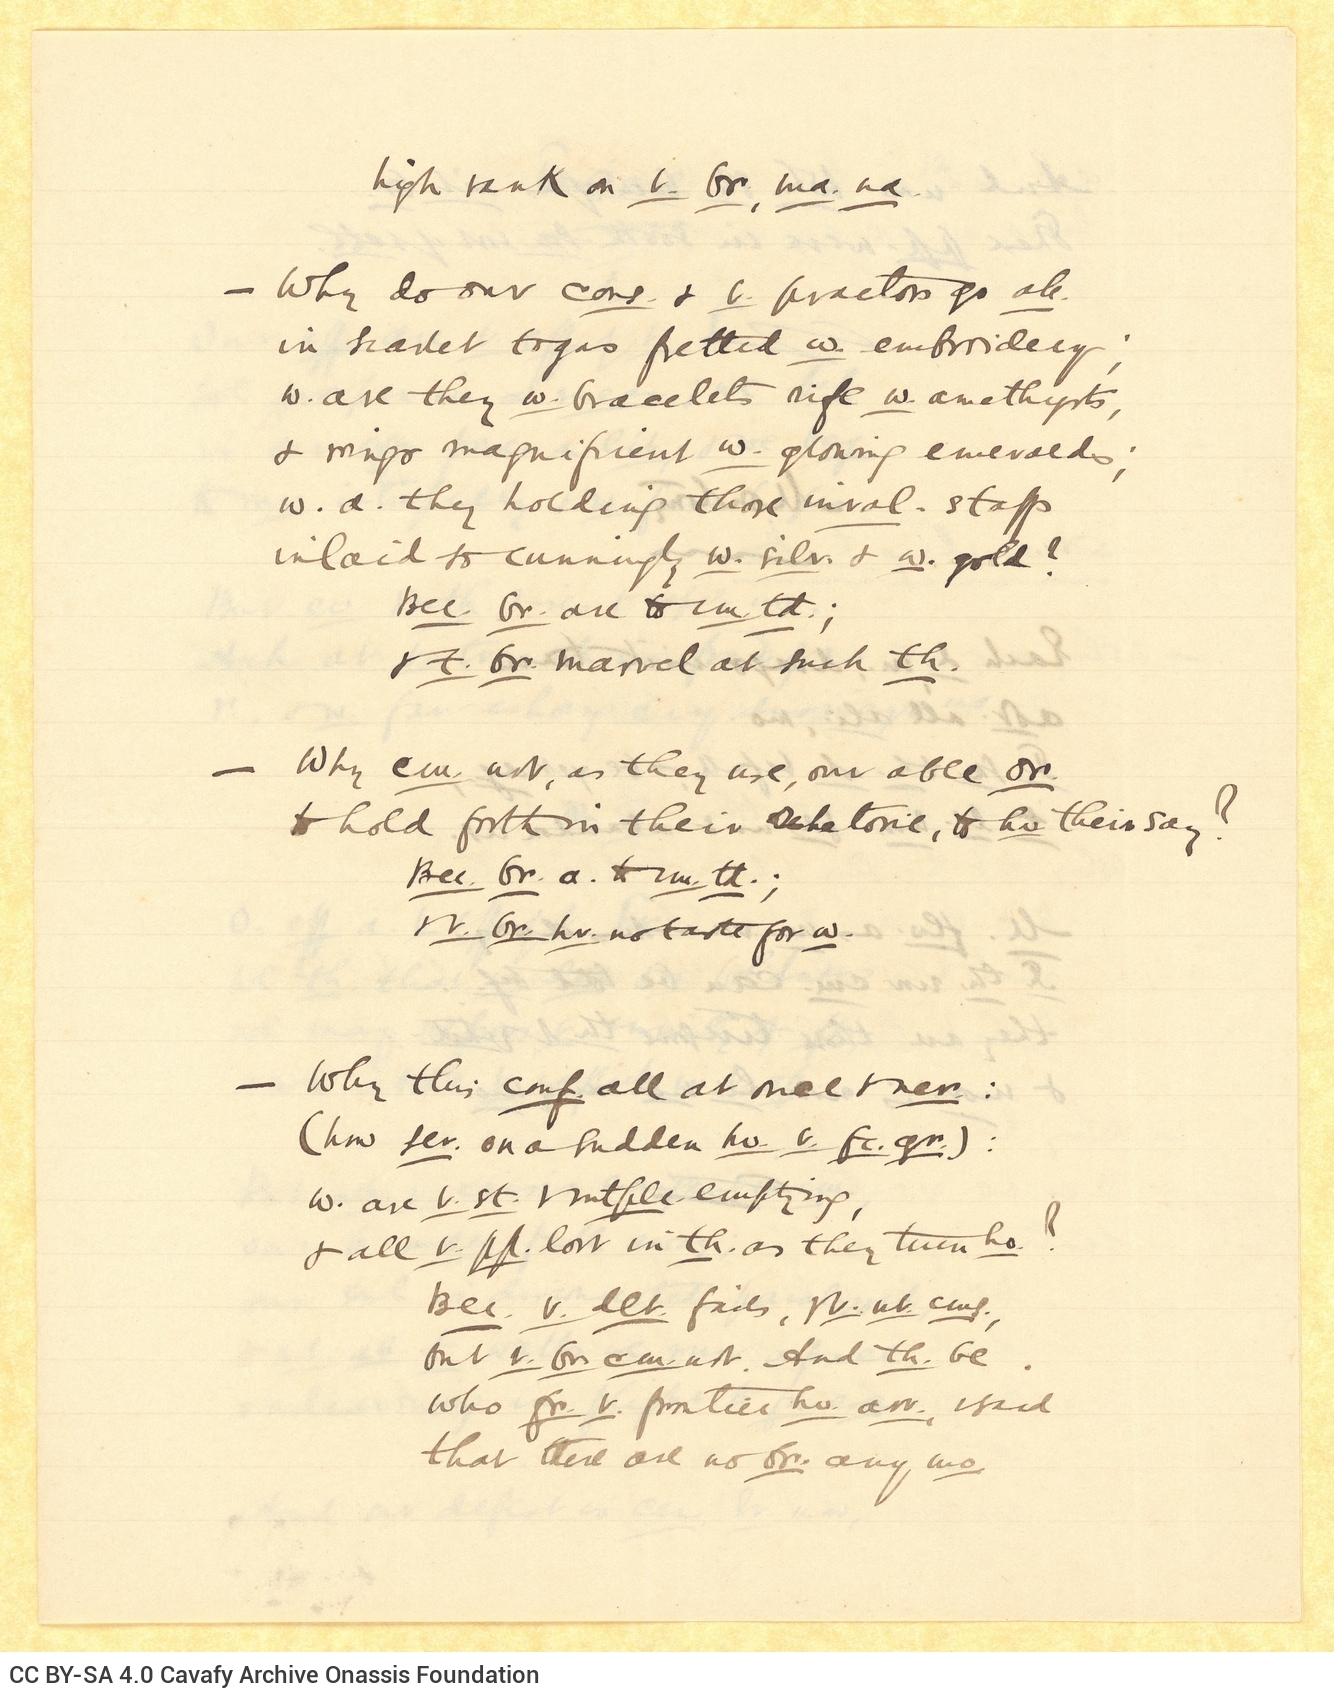 Handwritten text by Cavafy, including 21 poems of his translated into English ("An o[ld] man", "Candles", "Voices", etc.) 